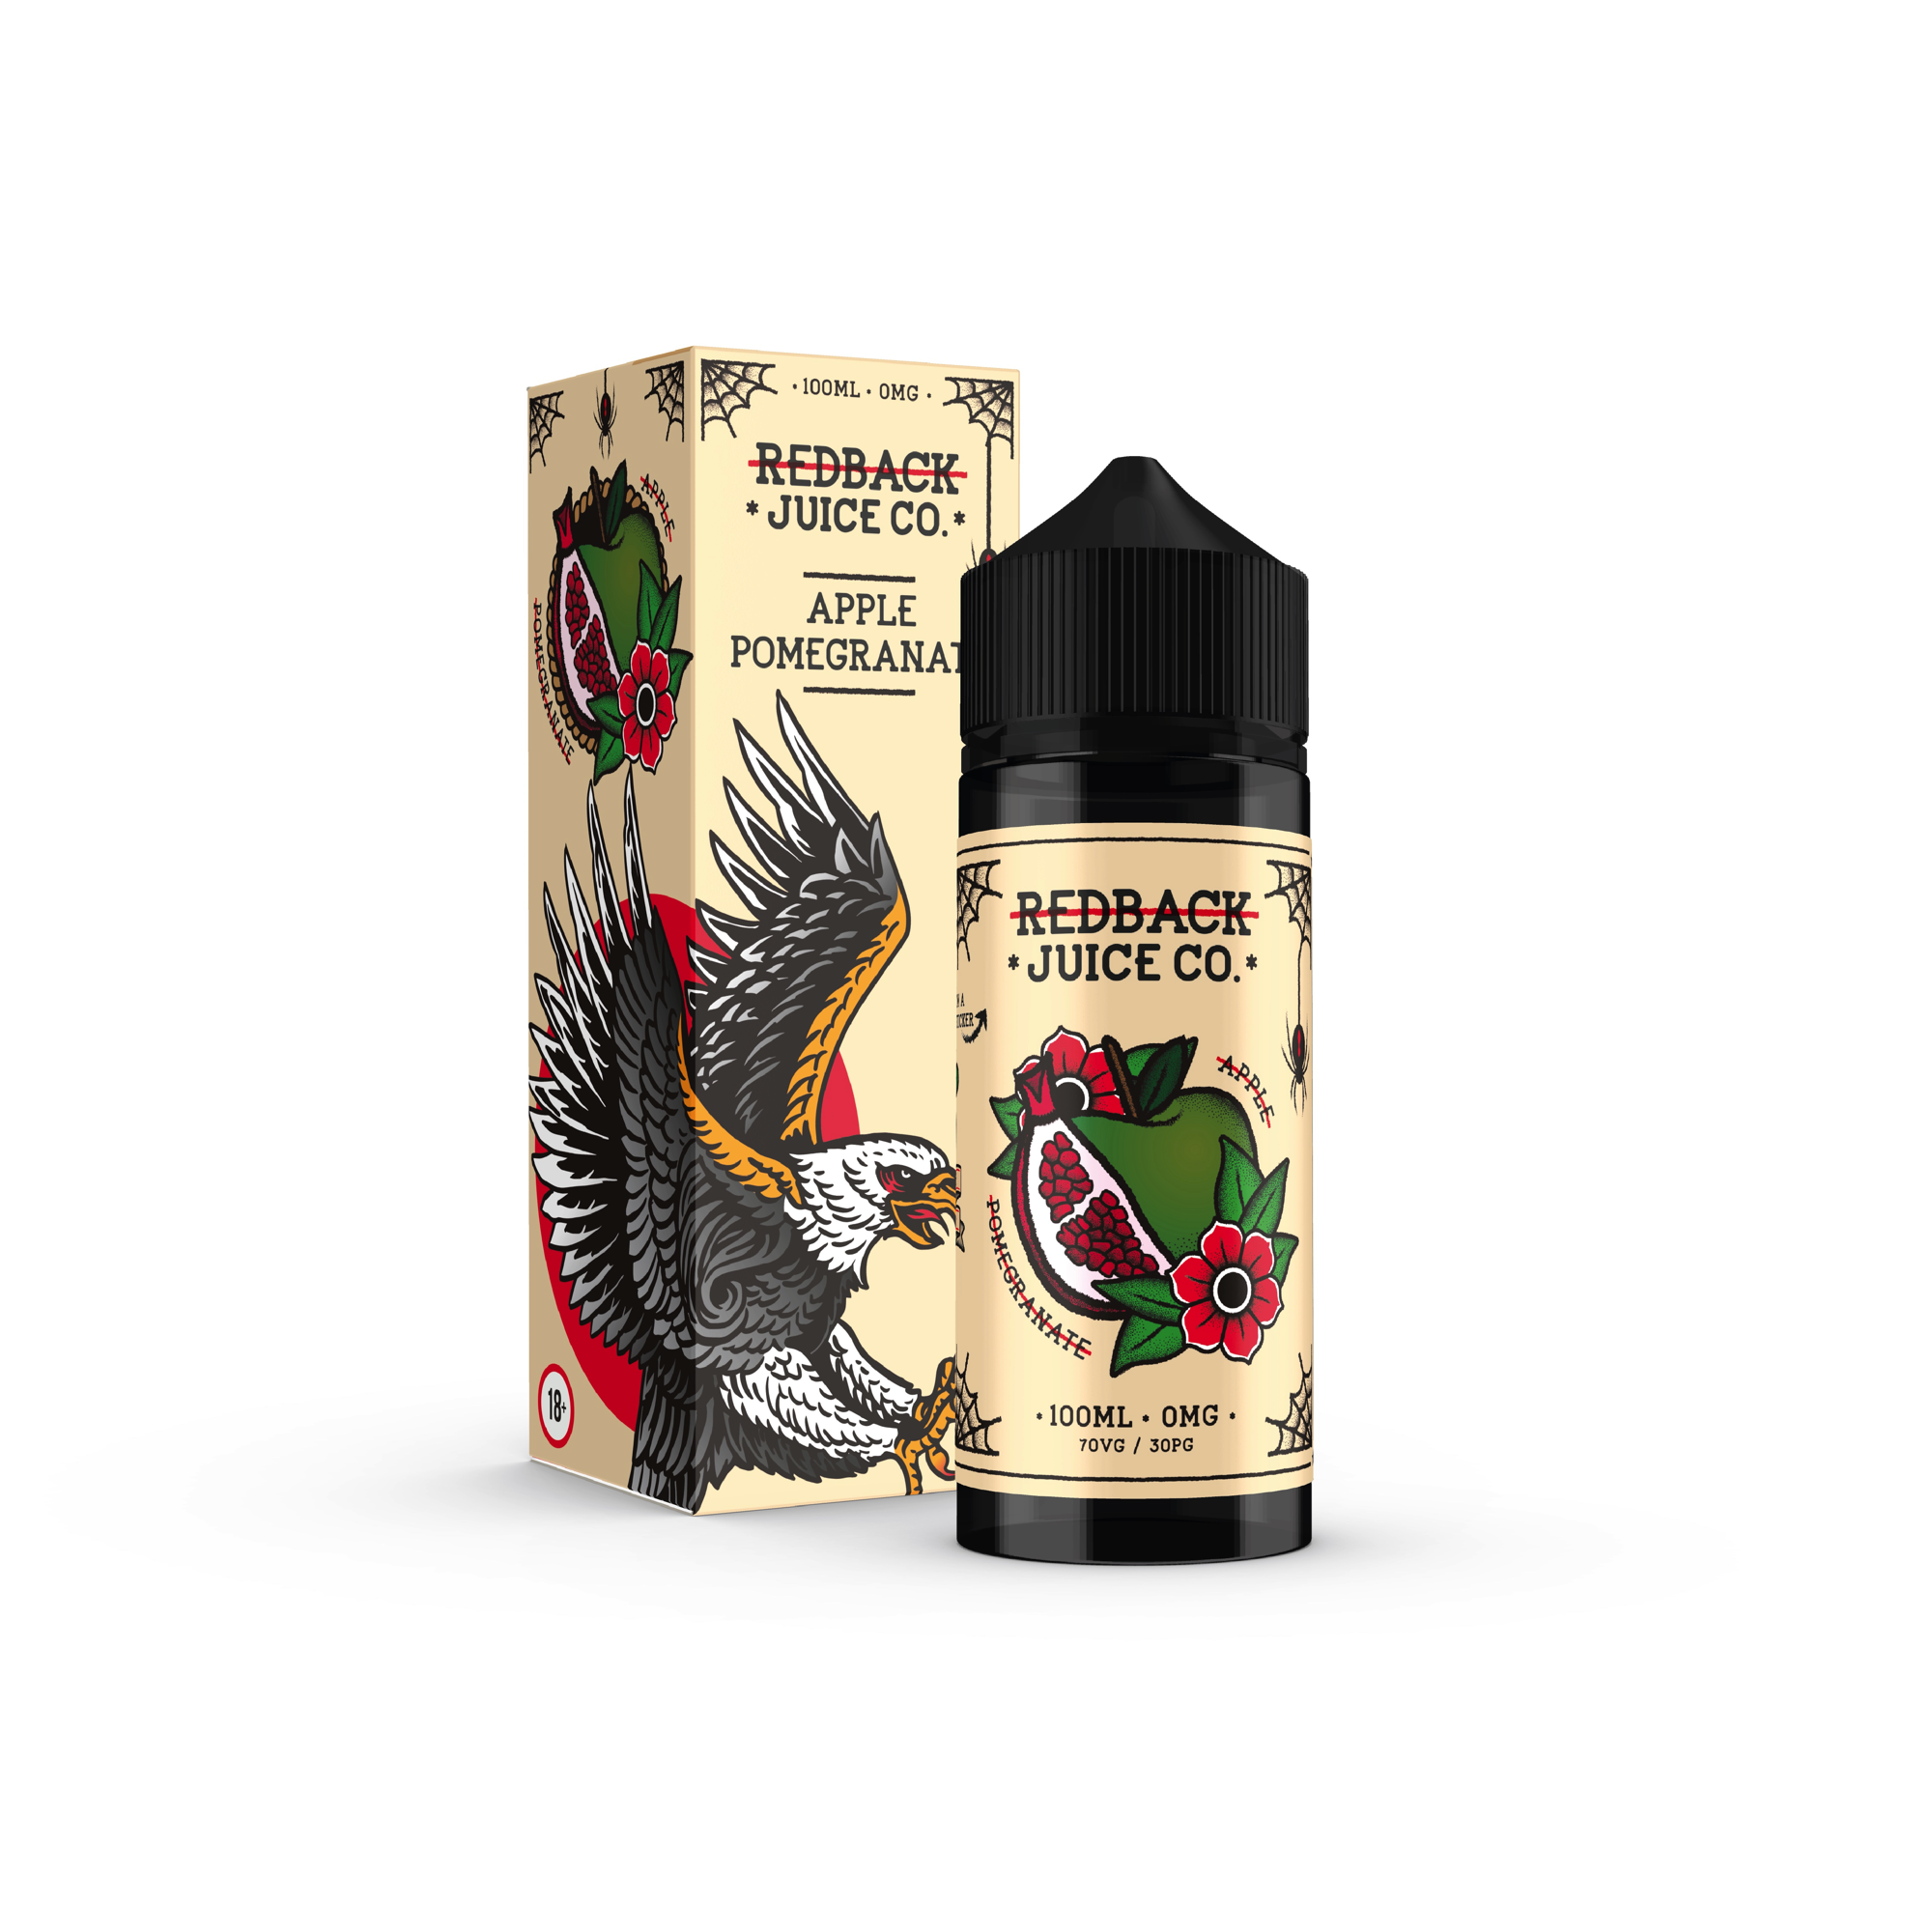 Apple and Pomegranate by Redback Juice Co Collection